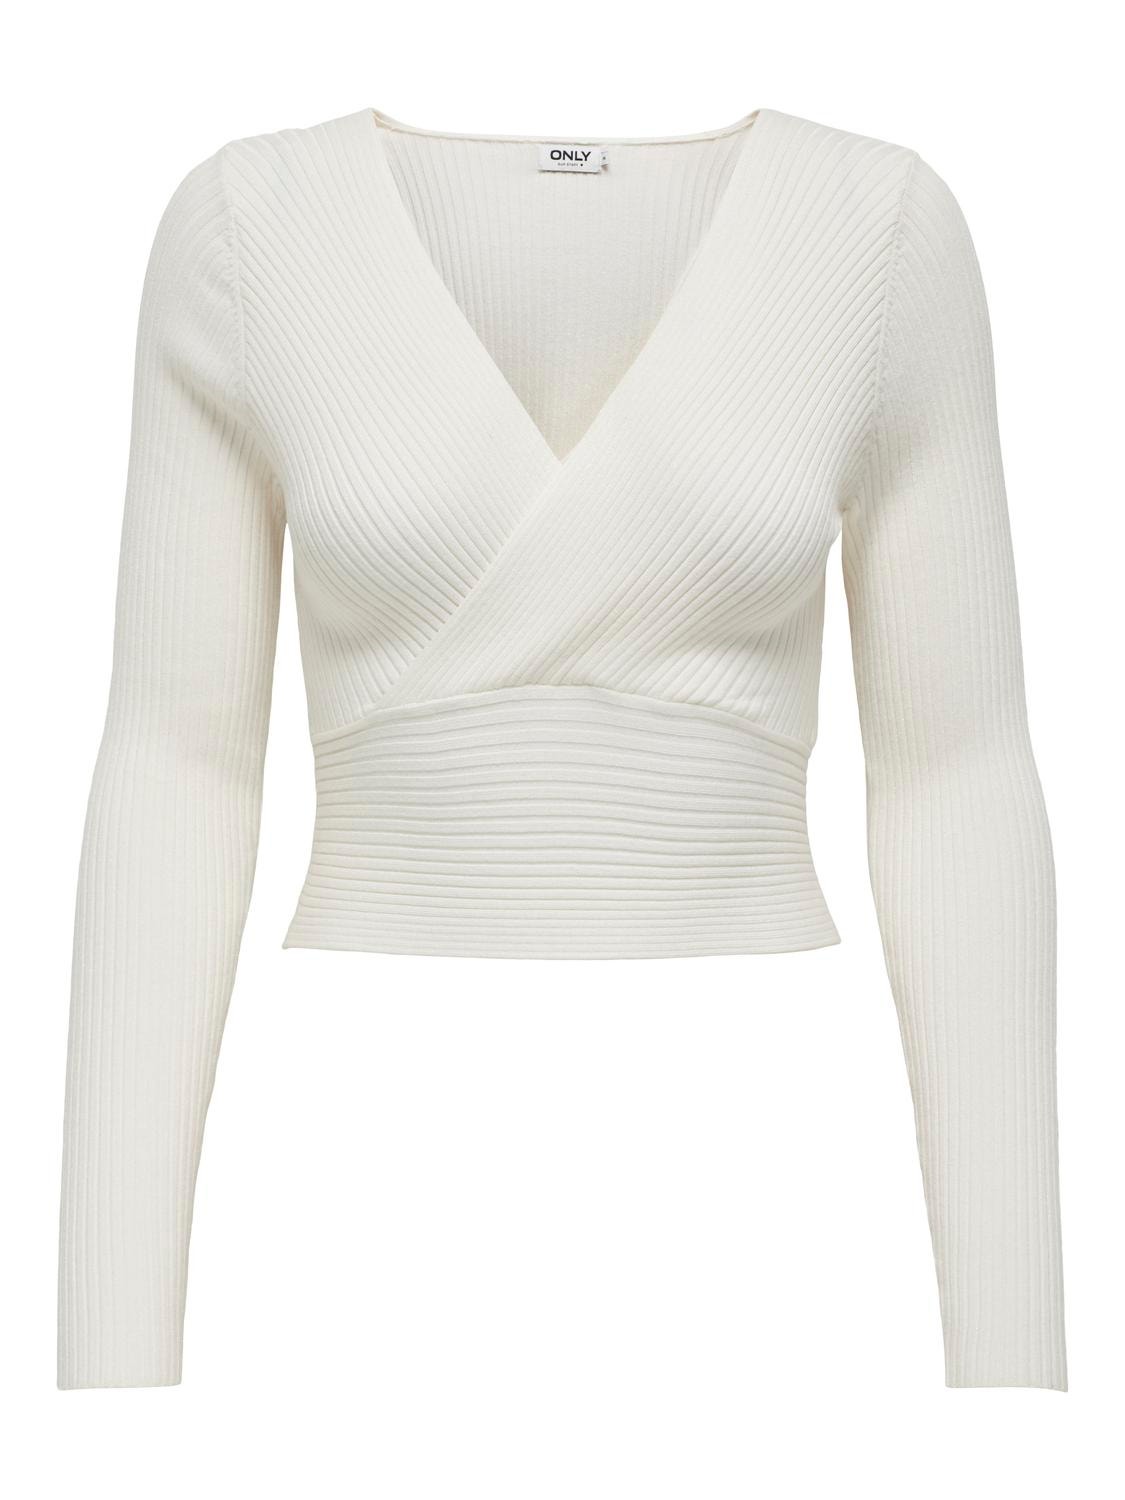 ONLY Cropped knitted top -Bright White - 15310652